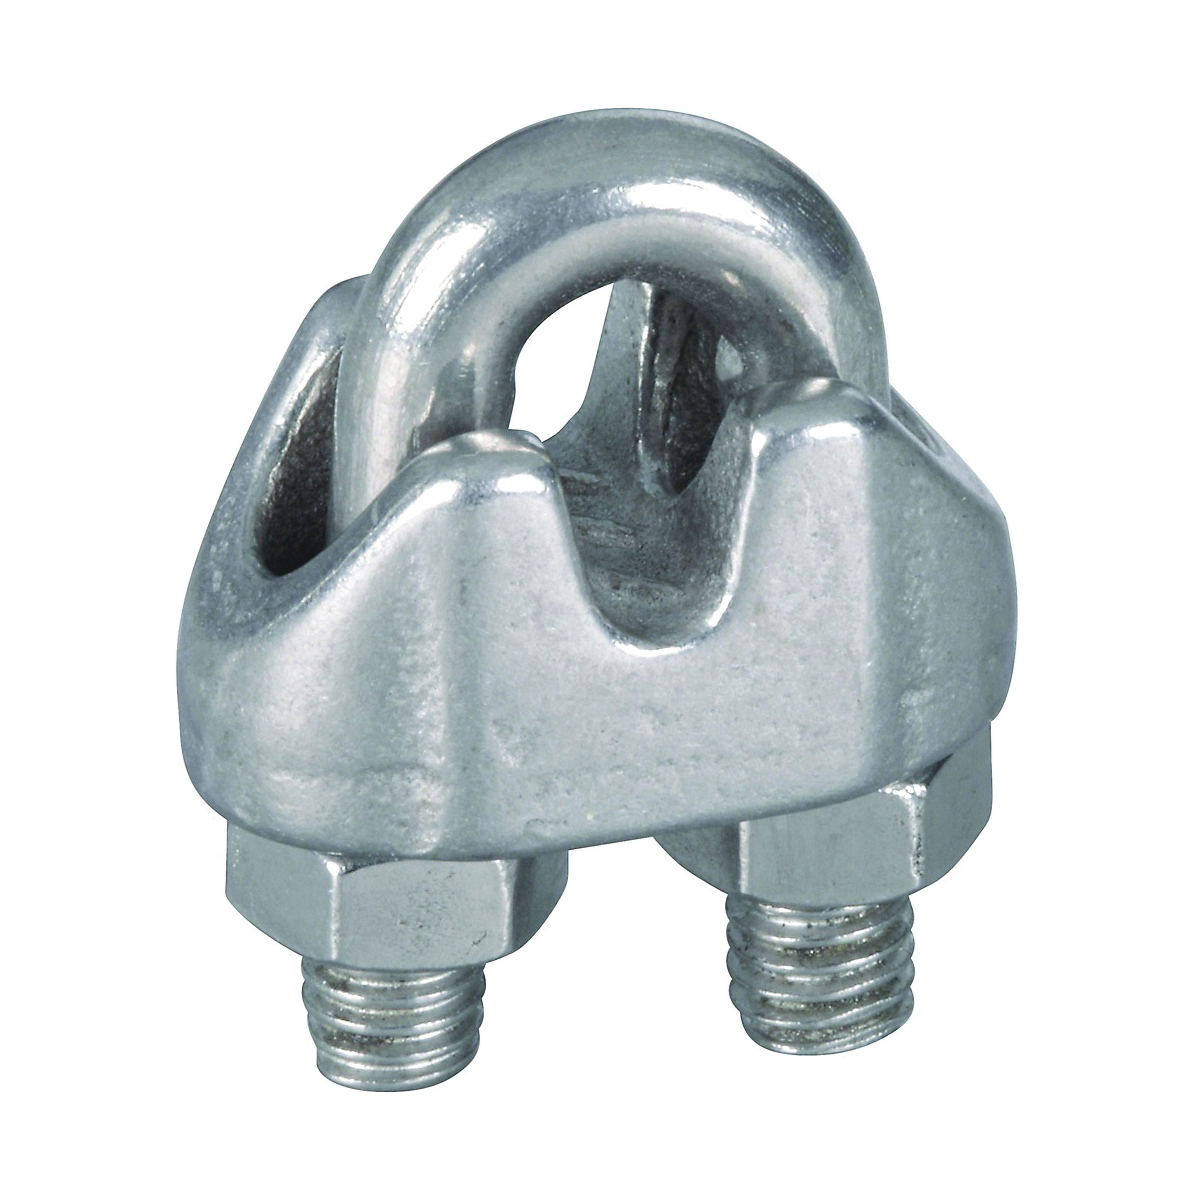 4230BC Series N830-312 Wire Cable Clamp, 1/8 in Dia Cable, 7/8 in L, Malleable Iron